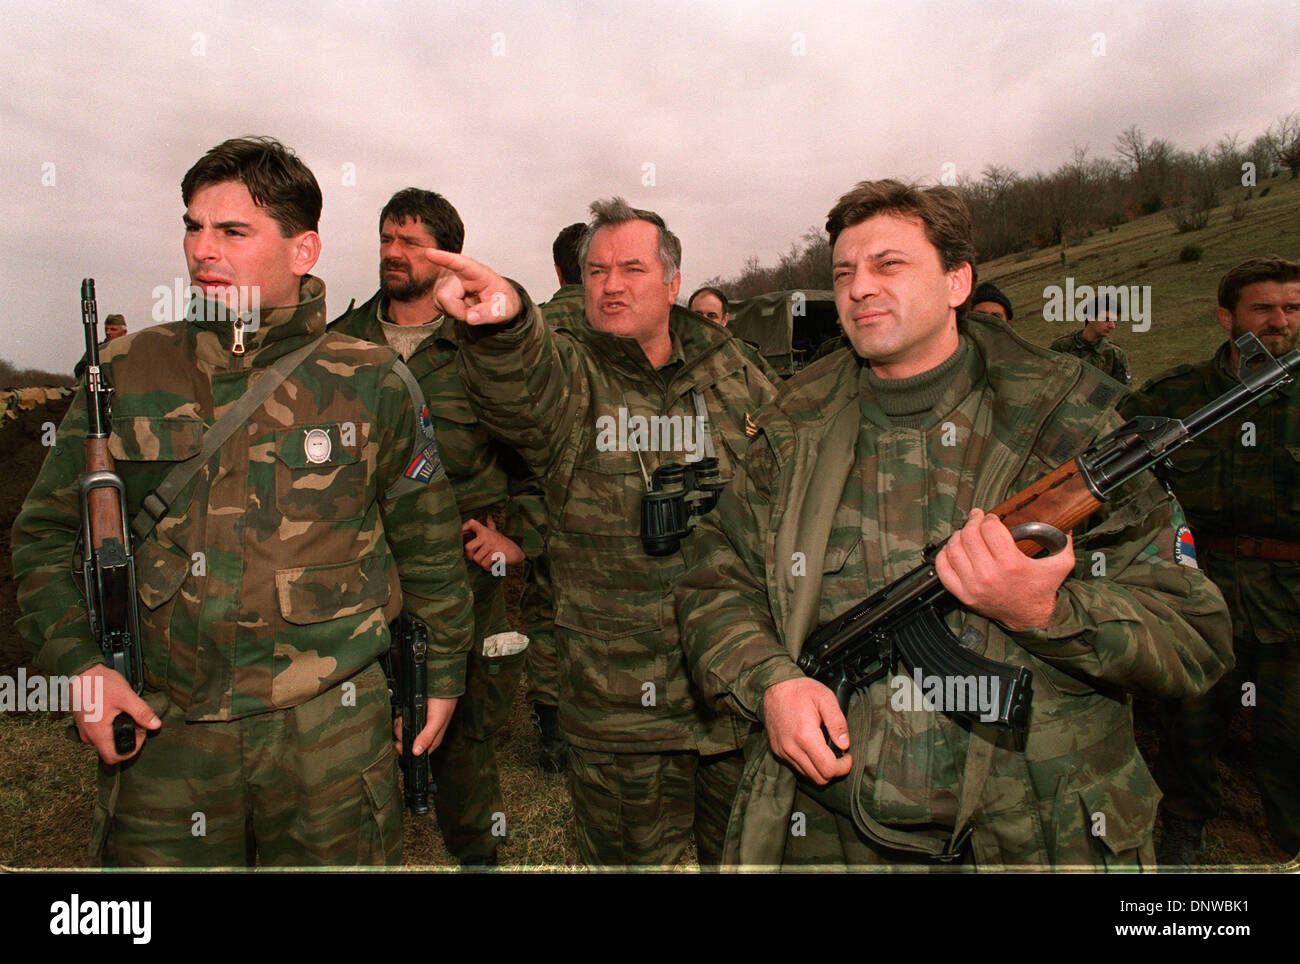 FILE PHOTO - Fugitive Bosnian Serb war crimes suspect RATKO MLADIC has been arrested in Serbia after 16 years on the run.  Mladic, 69, was found in the village of Lazarevo in northern Serbia where had been living under an assumed name. He faces charges over the massacre of at least 7,500 Bosnian Muslim men and boys at Srebrenica in 1995.  PICTURED:  Apr. 16, 1994 - Gorazde, Bosnia  Stock Photo